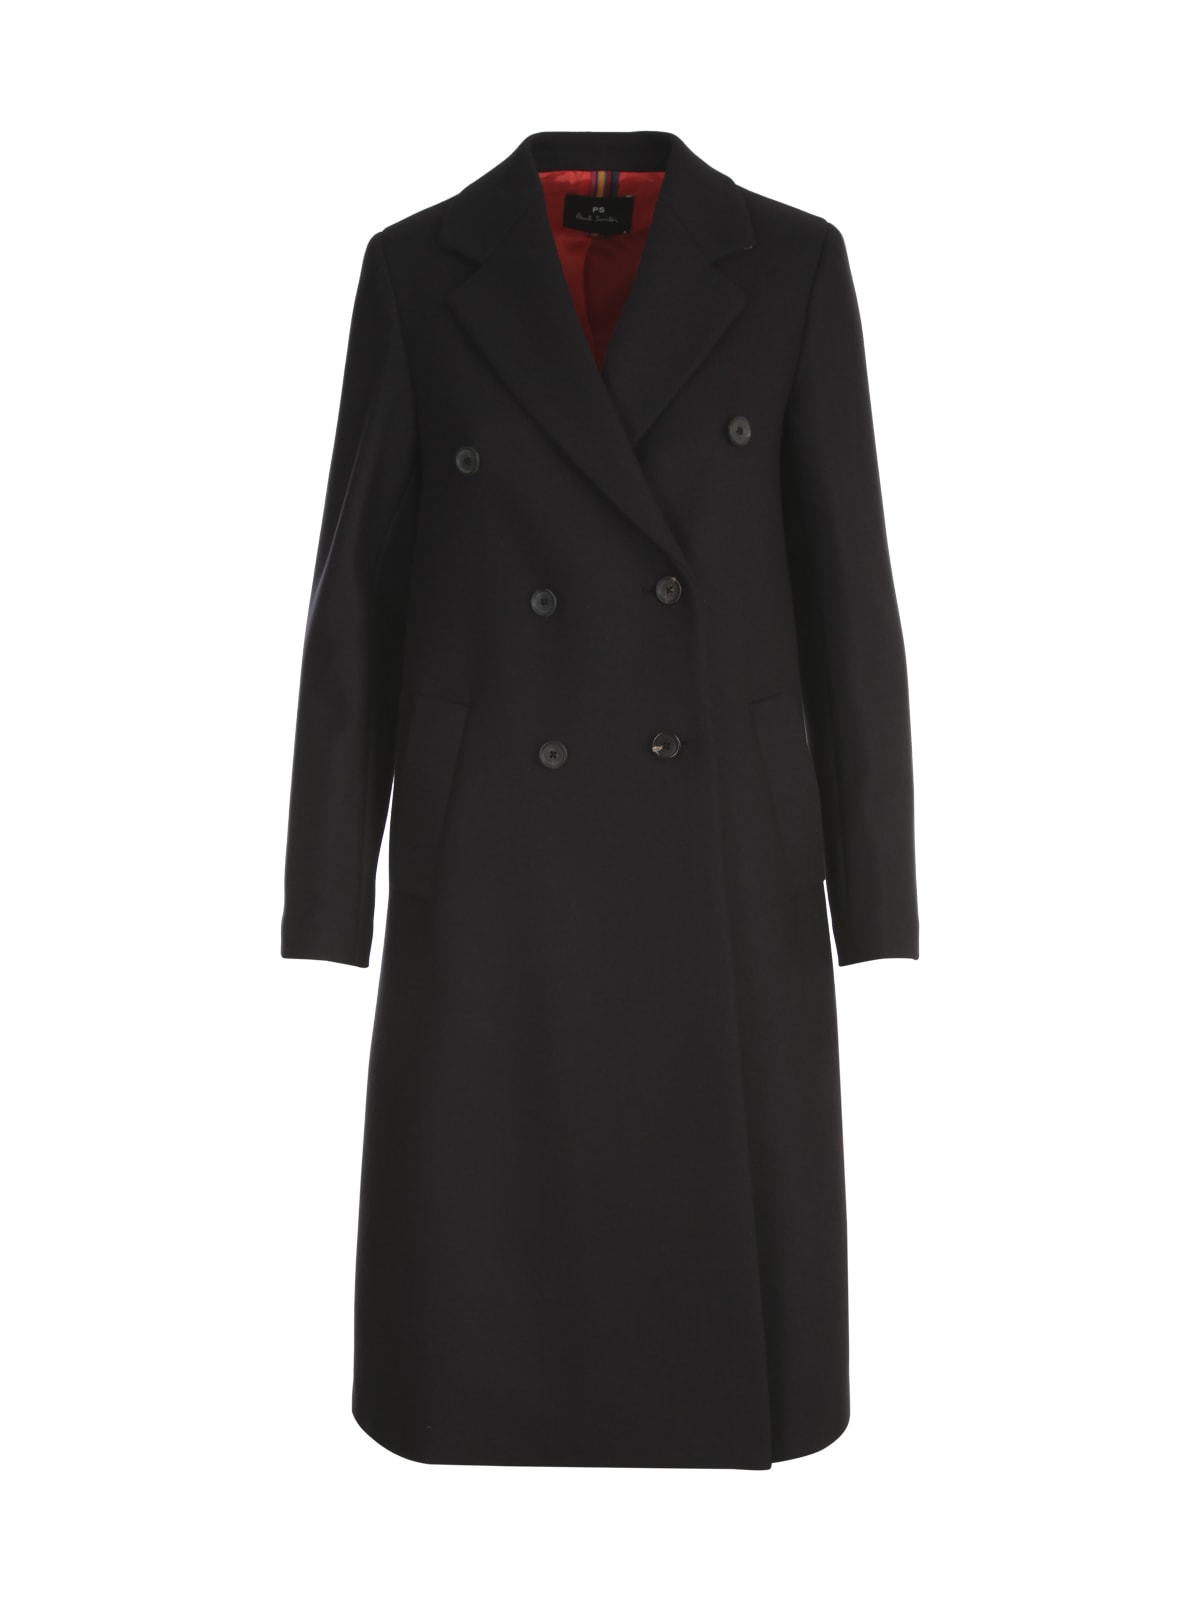 PS by Paul Smith Flared Double Breasted Coat